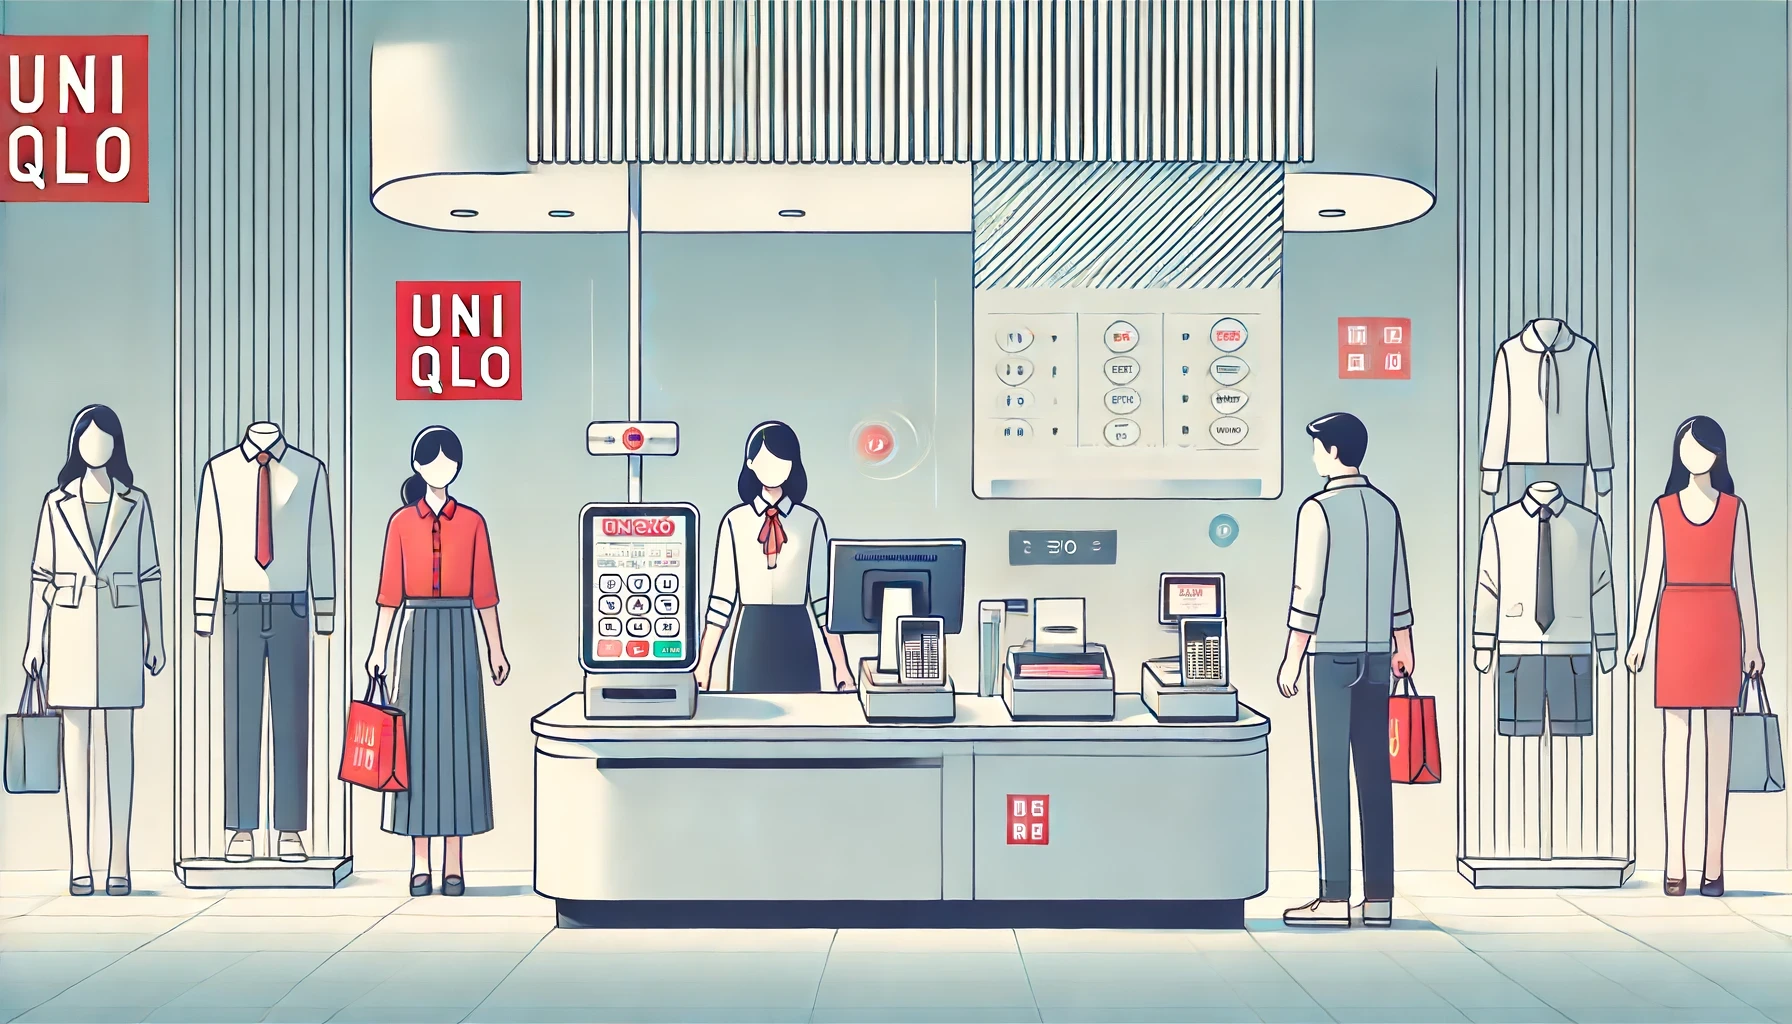 Uniqlo's Innovative Checkout Technology Paves the Way to ¥10 Trillion in Sales